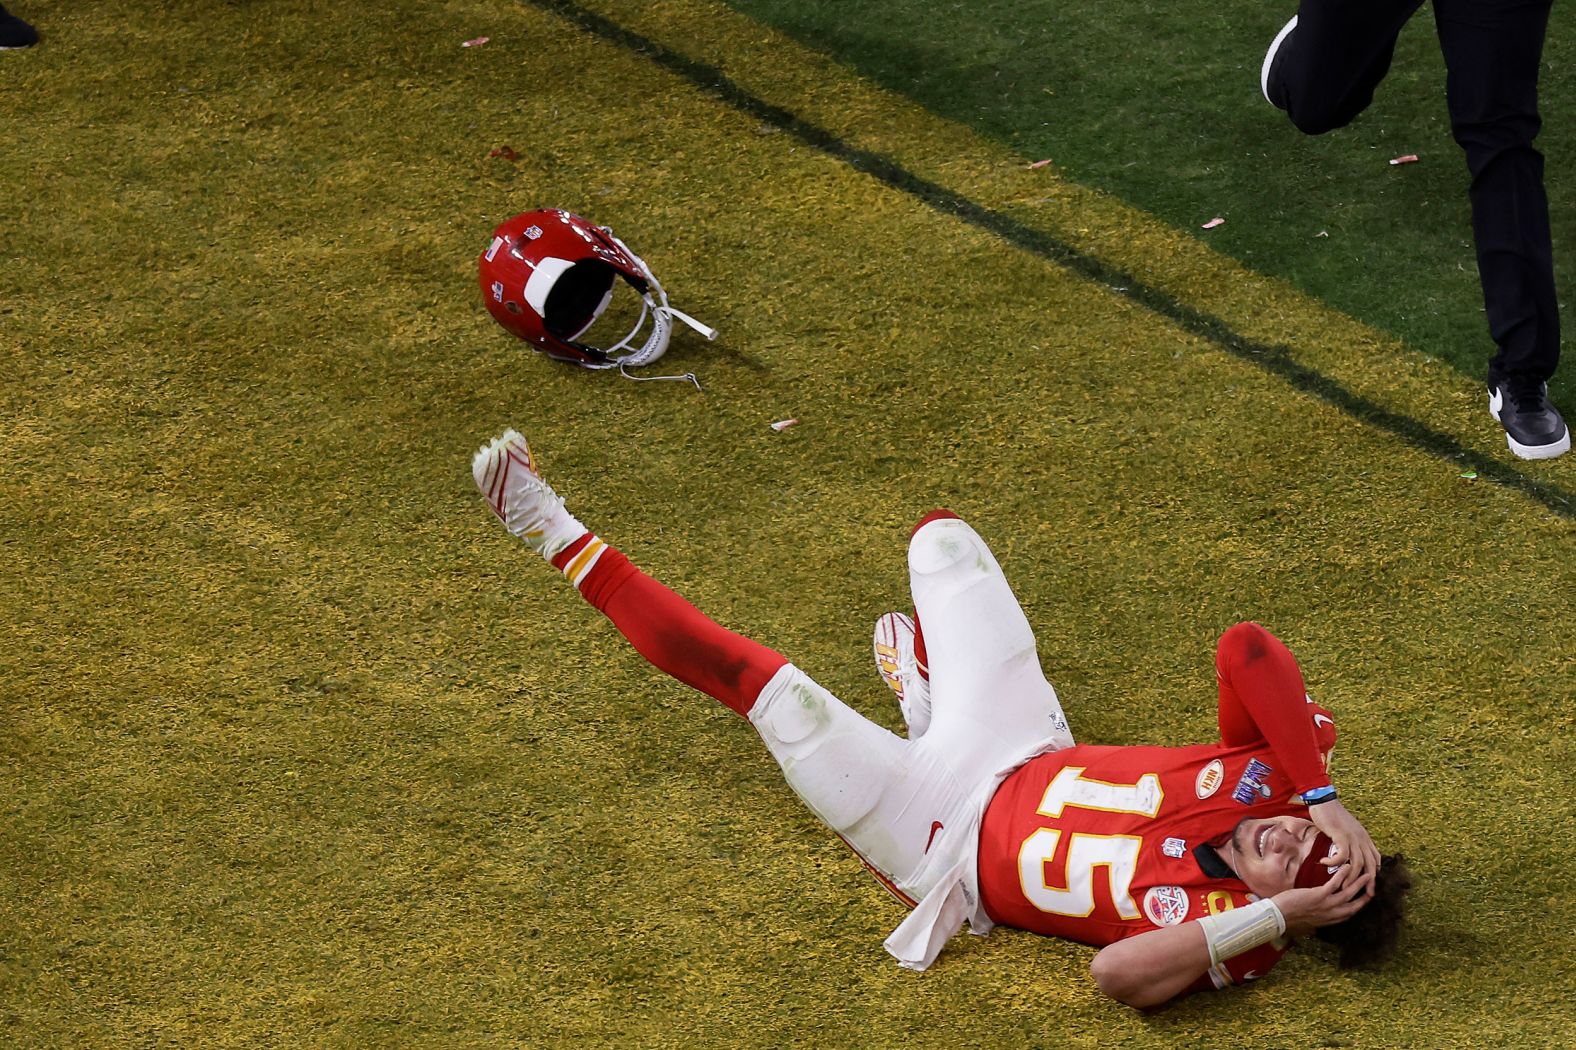 Mahomes lies on the ground after throwing the game-winning touchdown to Mecole Hardman Jr.